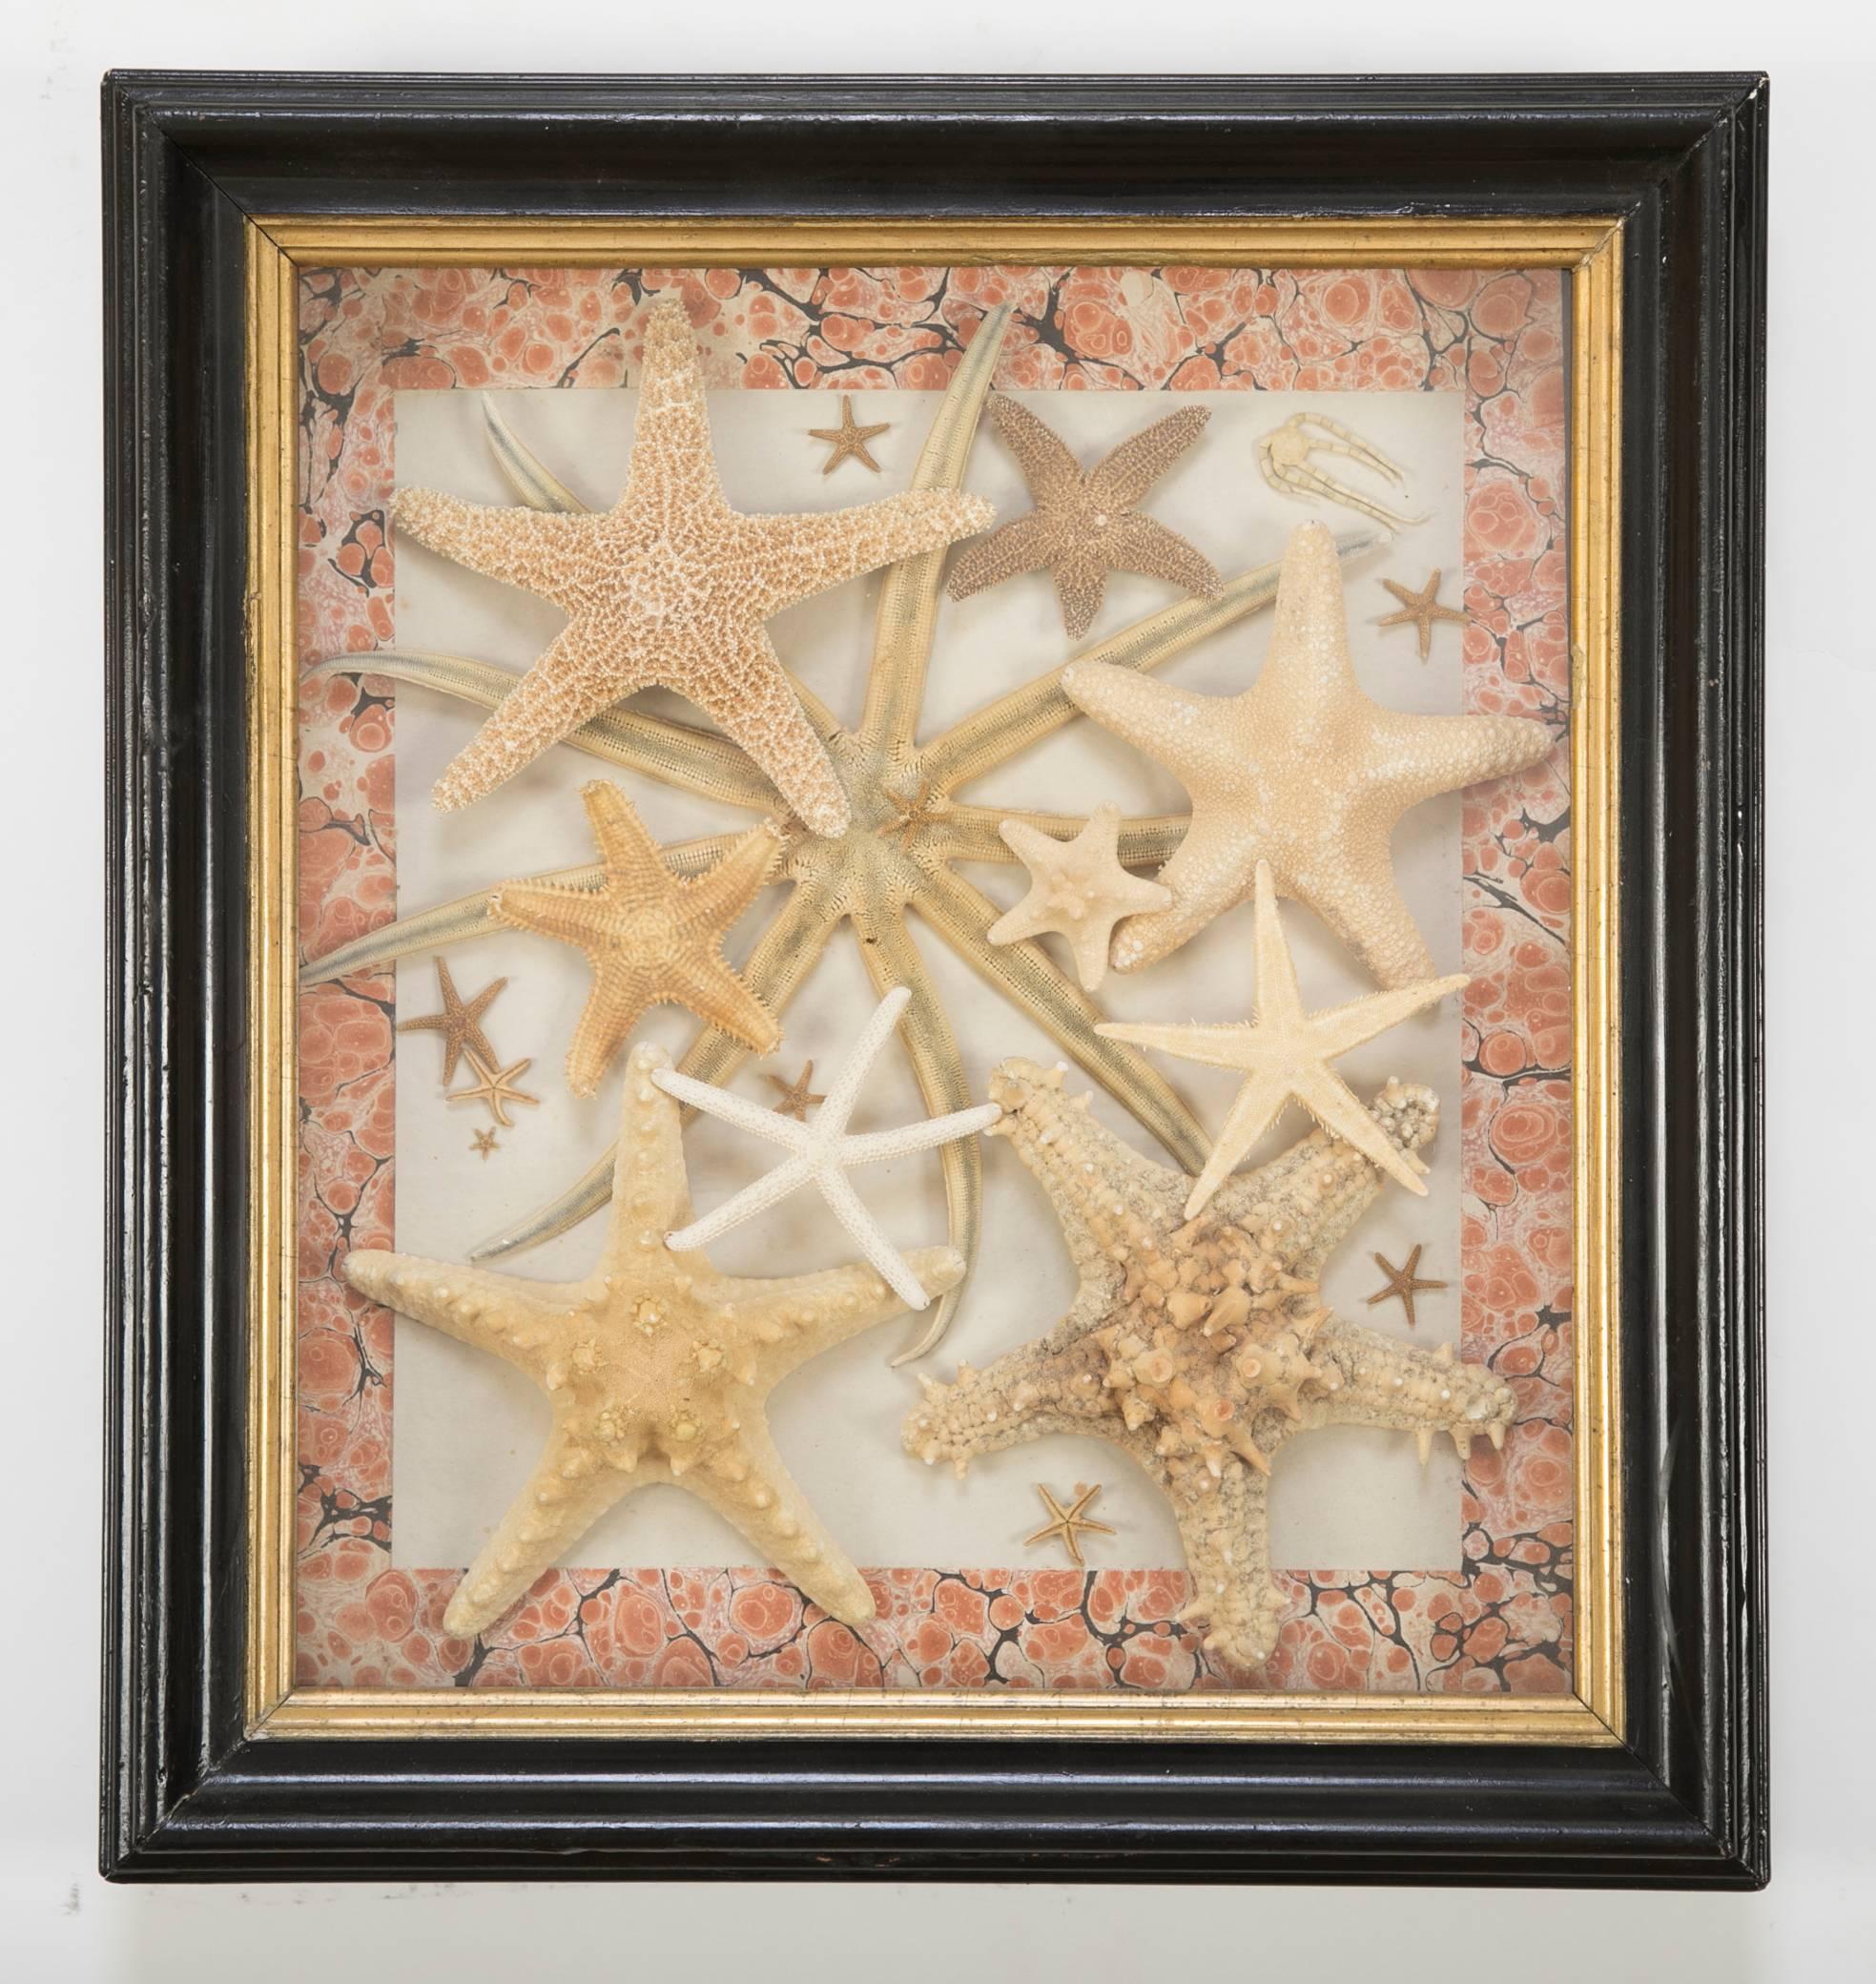 Starfish Collection in a Mahogany and Giltwood Frame 3